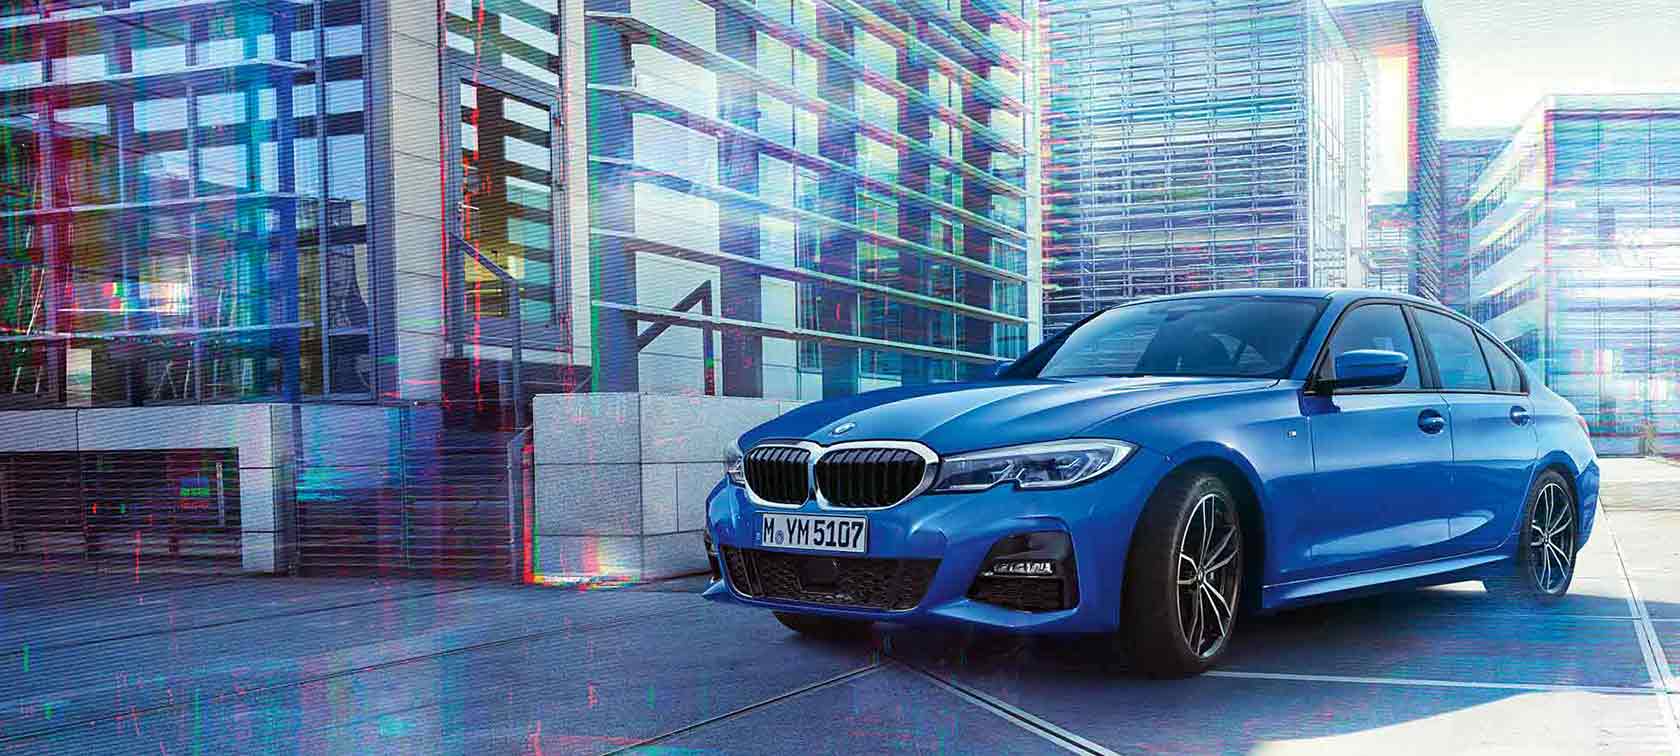 THE BMW 3 SERIES